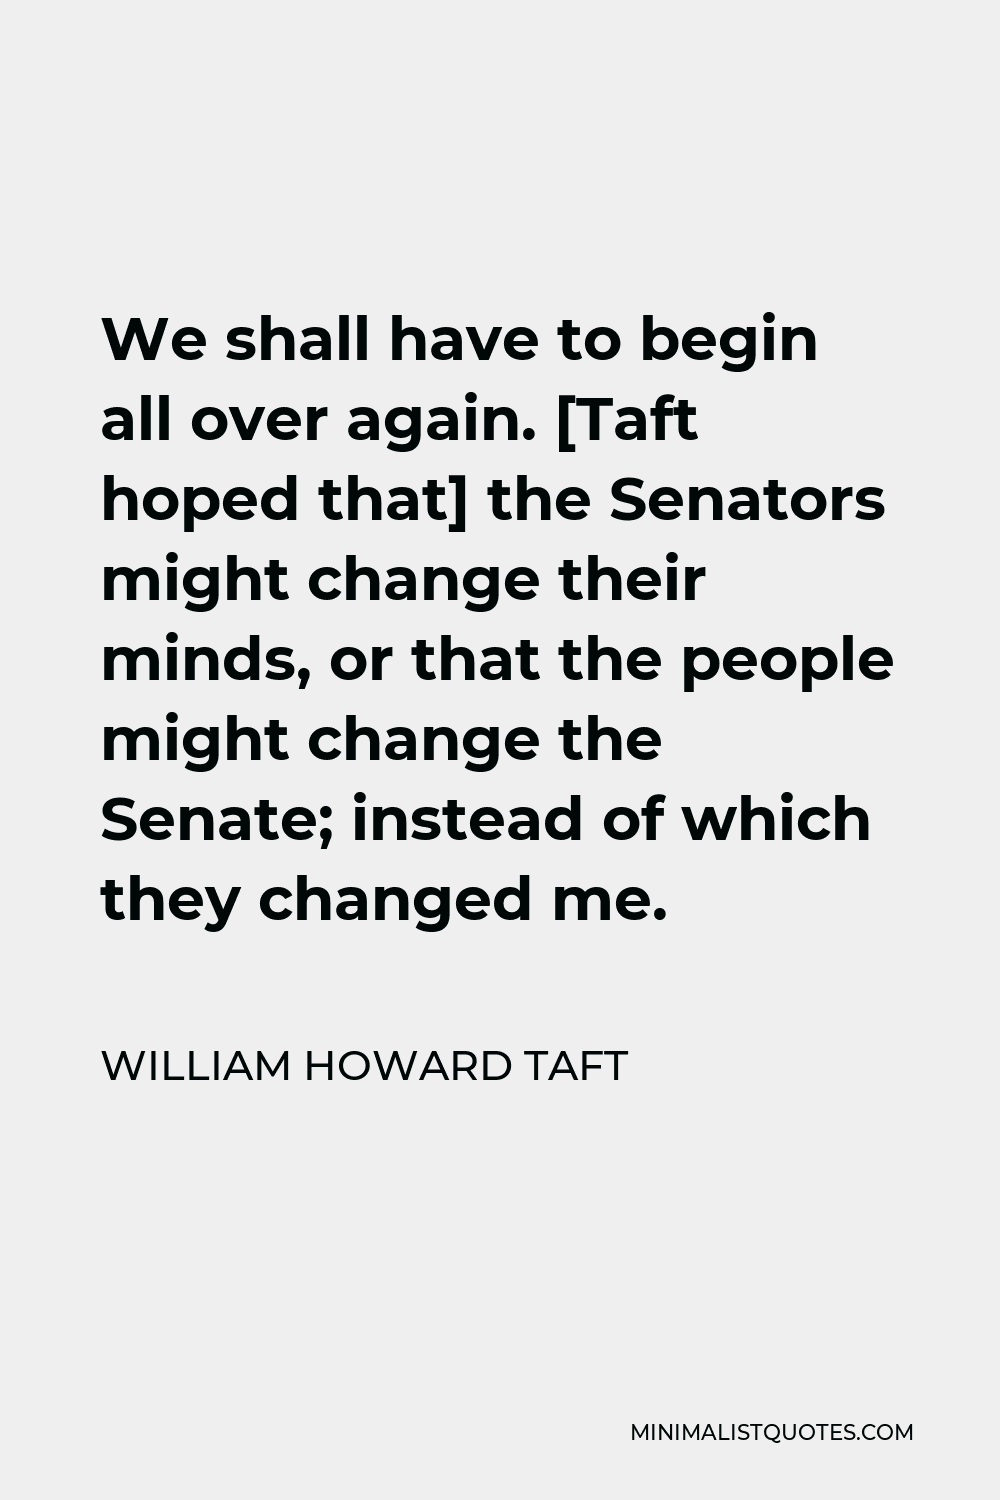 William Howard Taft Quote - We shall have to begin all over again. [Taft hoped that] the Senators might change their minds, or that the people might change the Senate; instead of which they changed me.